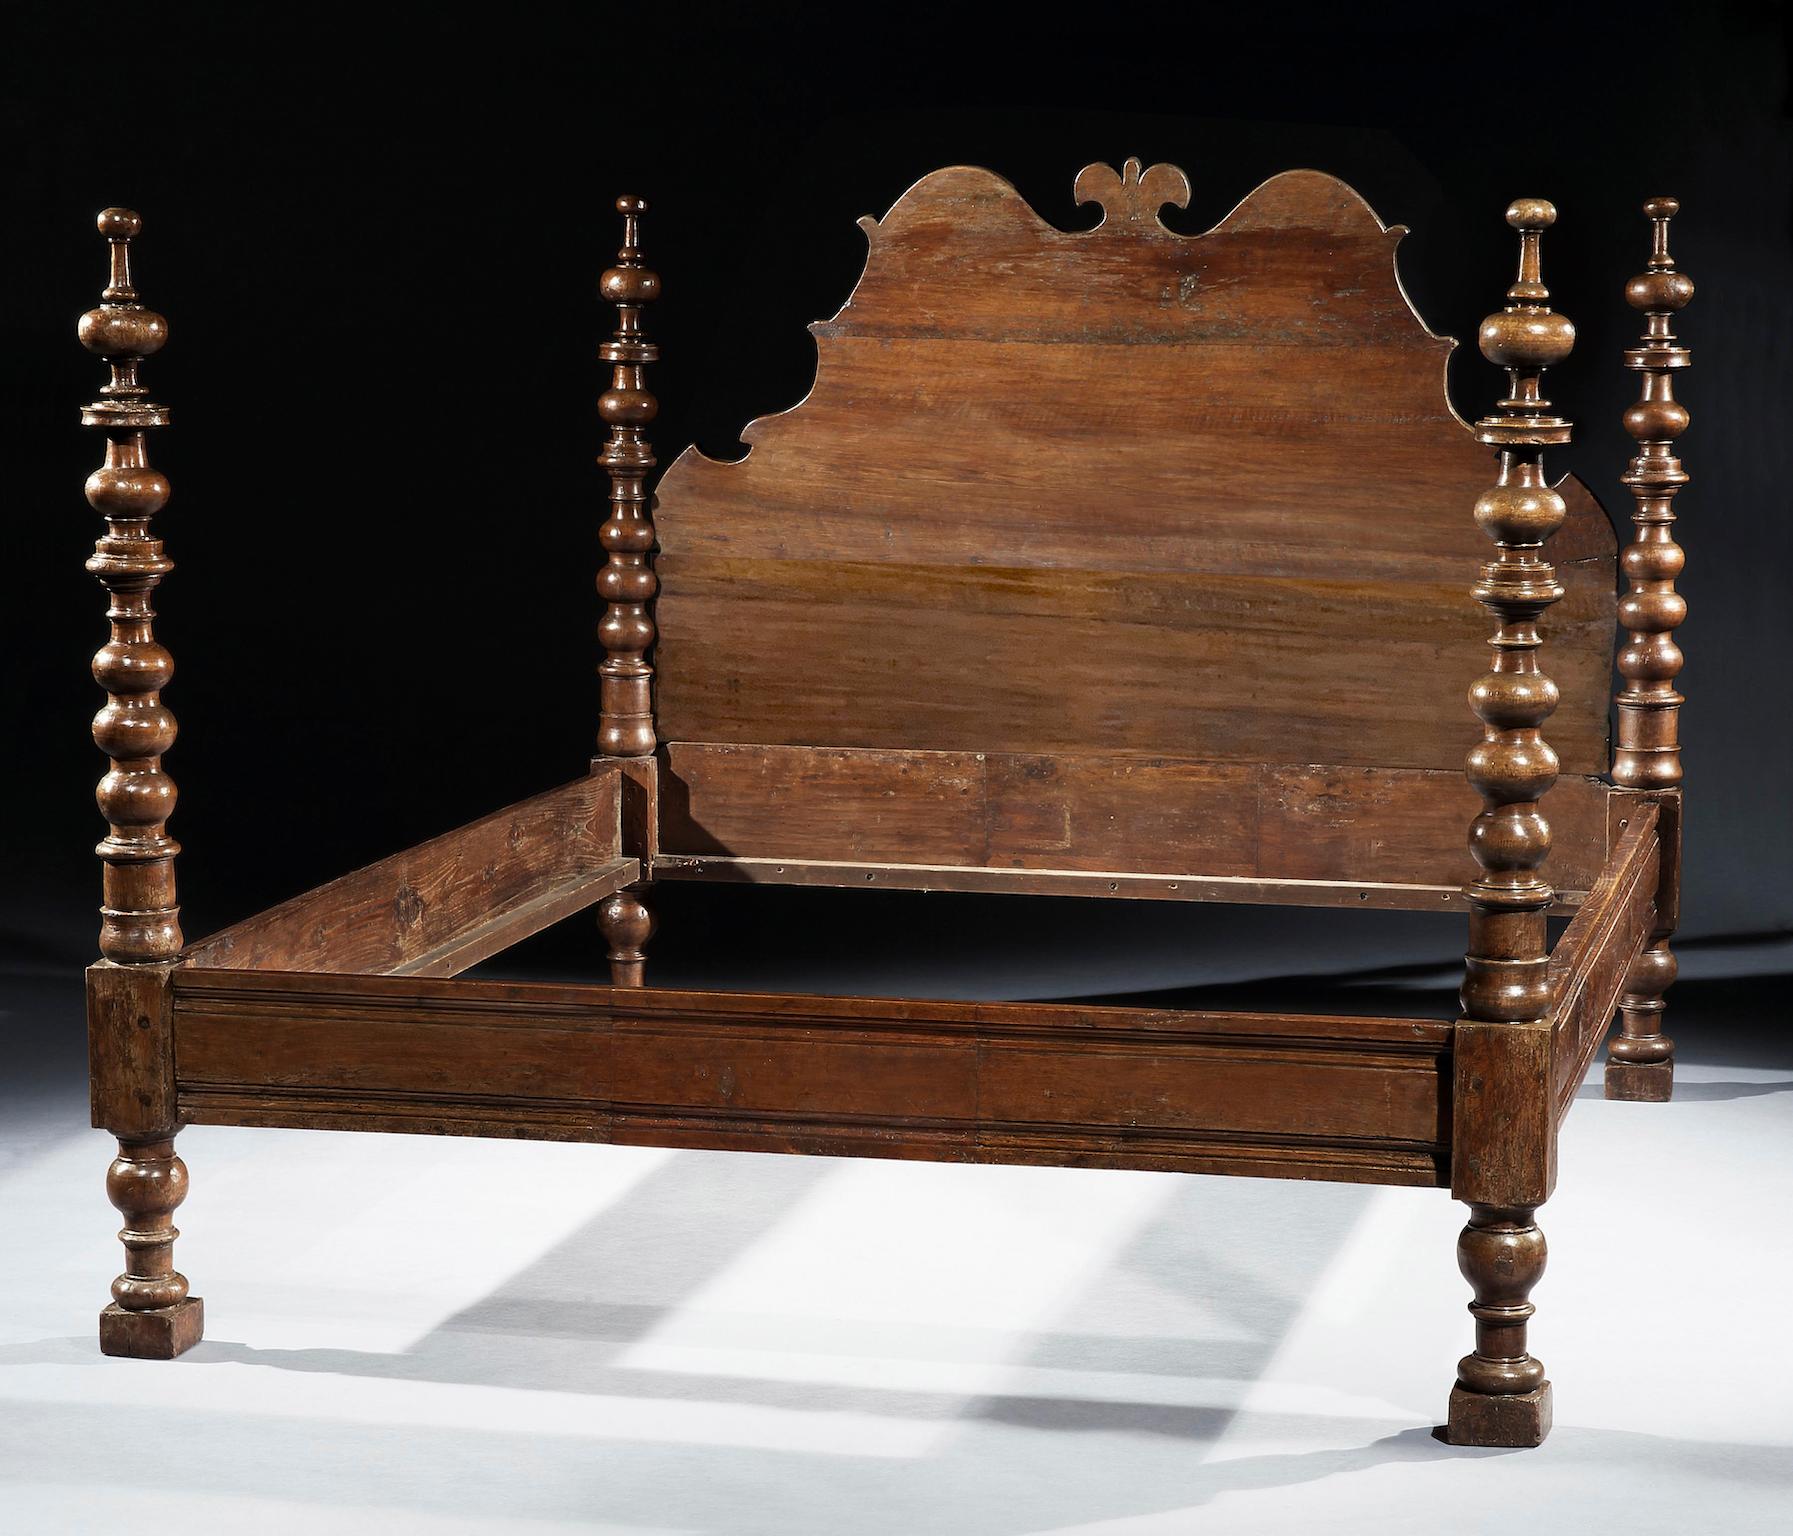 The shaped bedhead with a central fleur-de-lys. The four boldly turned posts joined by square stretchers. Most likely Tuscan.

Measures: 184cm 72in wide, 213cm 83½indeep, 150.5cm 59.25in high

Provenance: Count and Countess Martignone. Avid